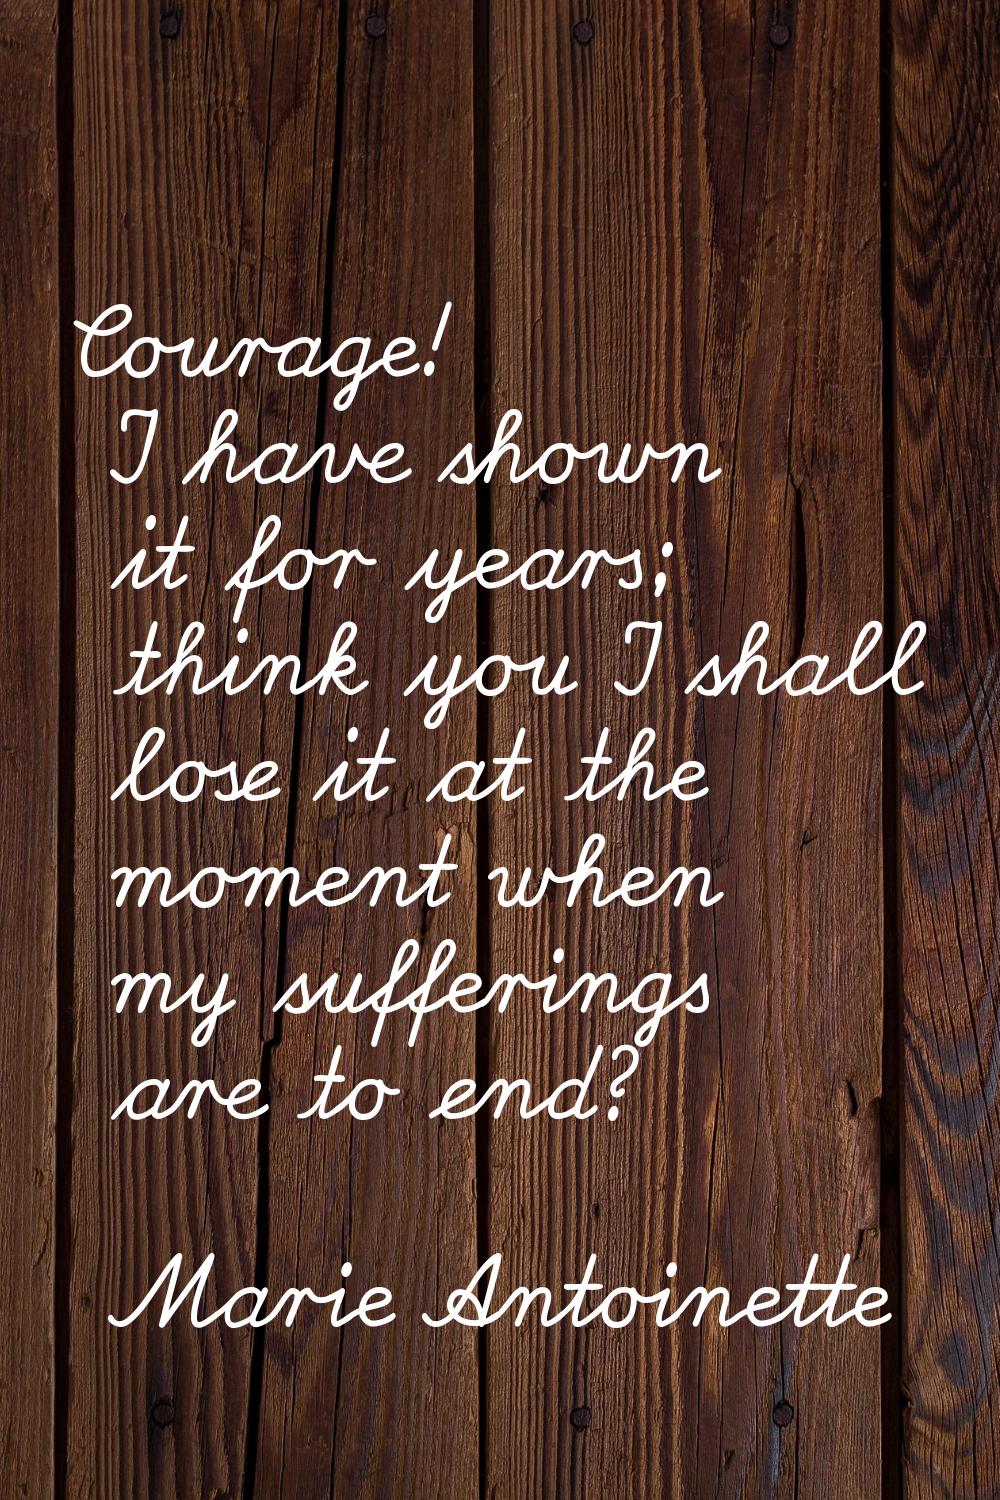 Courage! I have shown it for years; think you I shall lose it at the moment when my sufferings are 